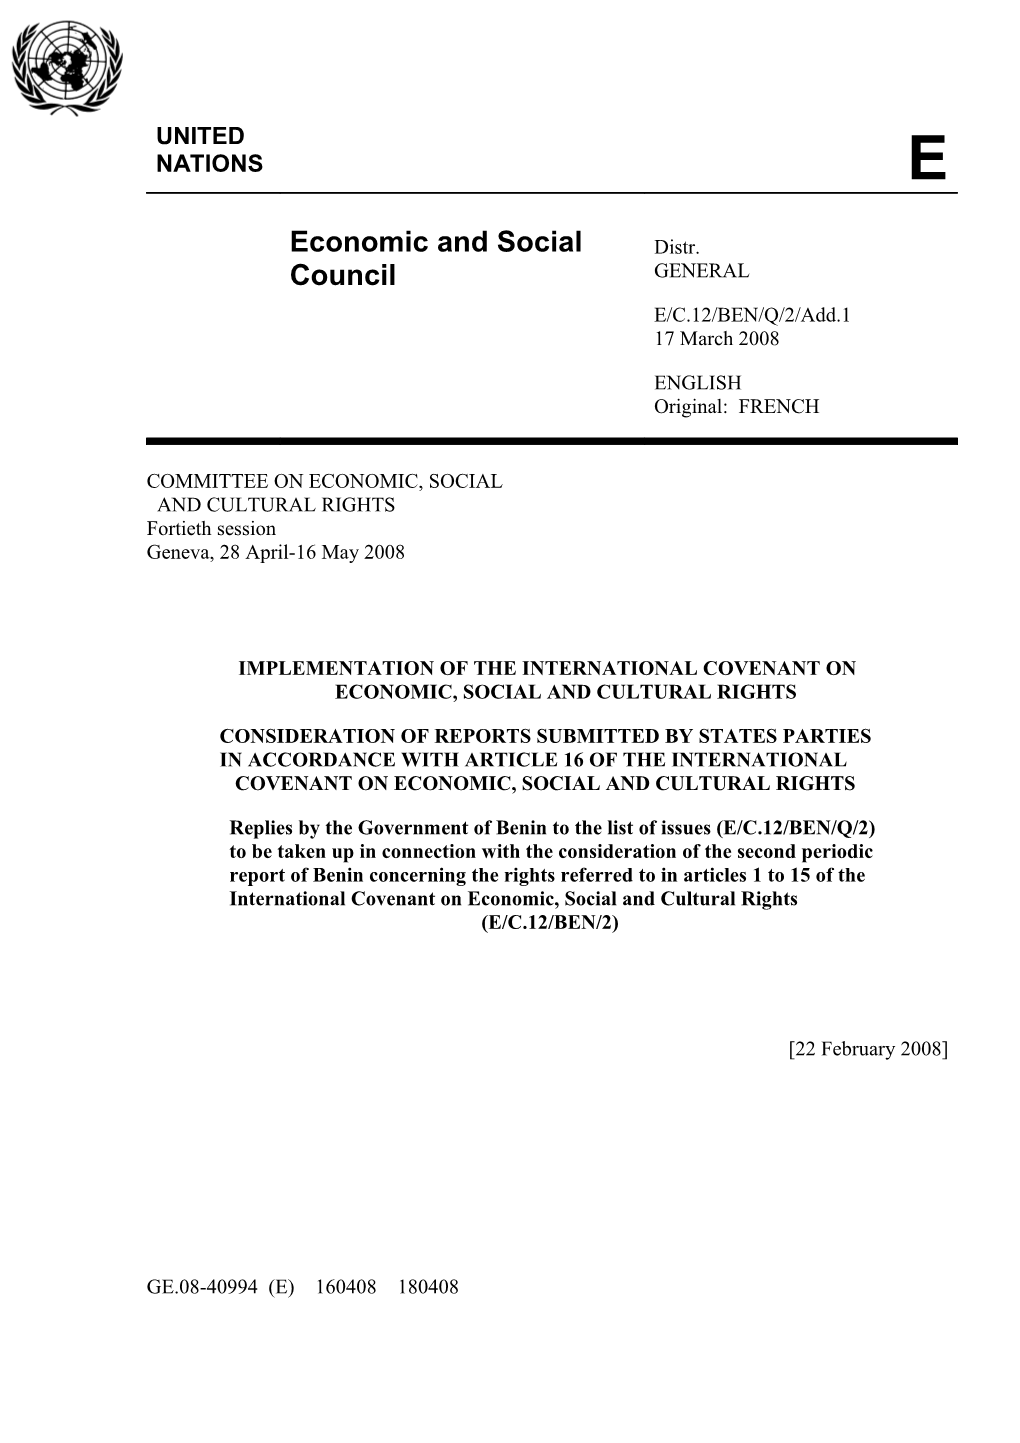 Implementation of the International Covenant Oneconomic, Social and Cultural Rights s1